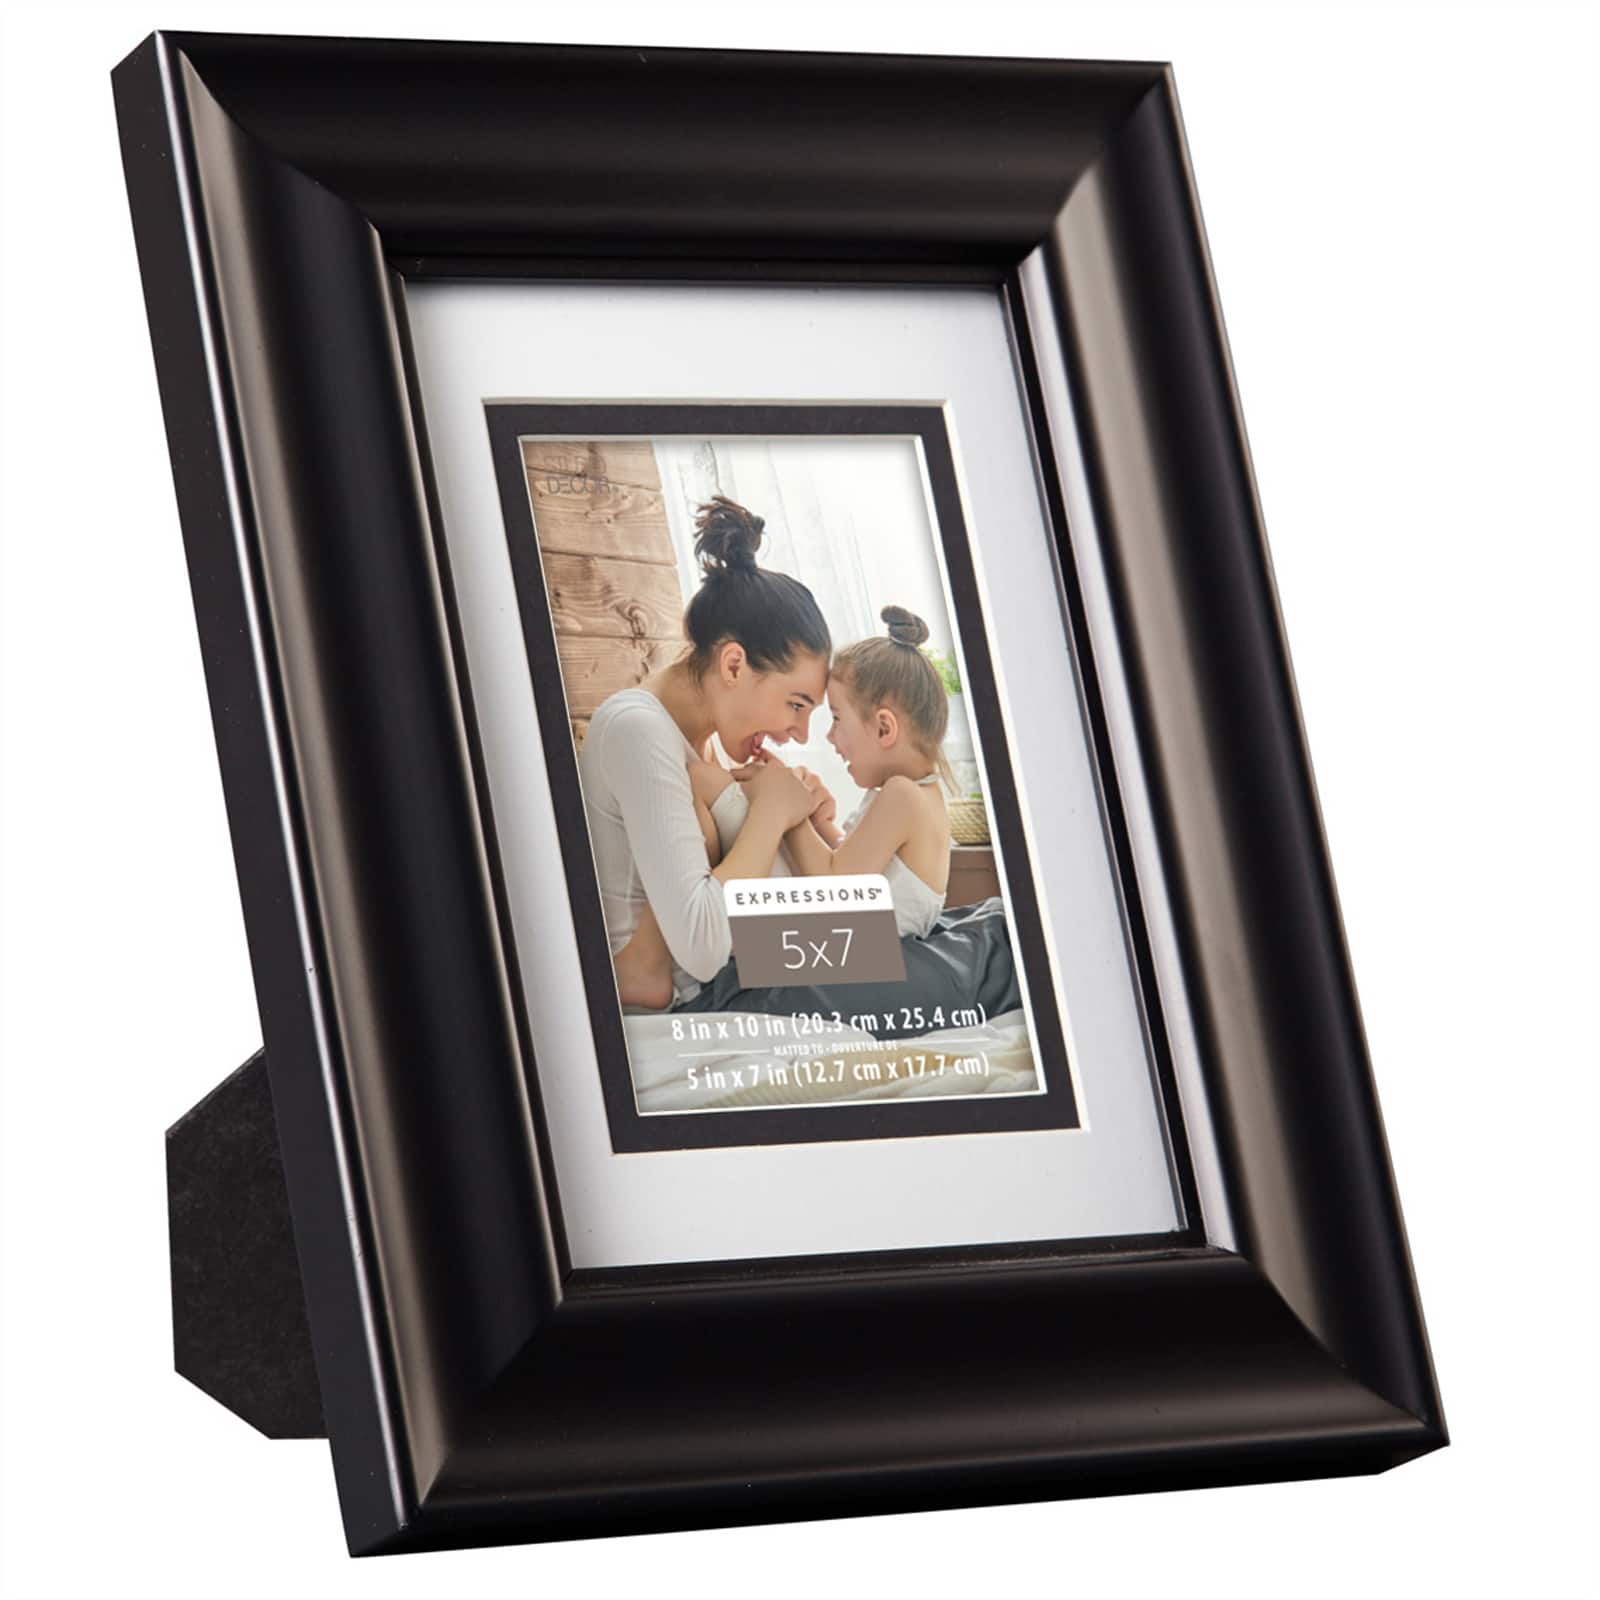 12 Pack: Black Beveled 5" x 7" Frame with Double Mat, Expressions™ by